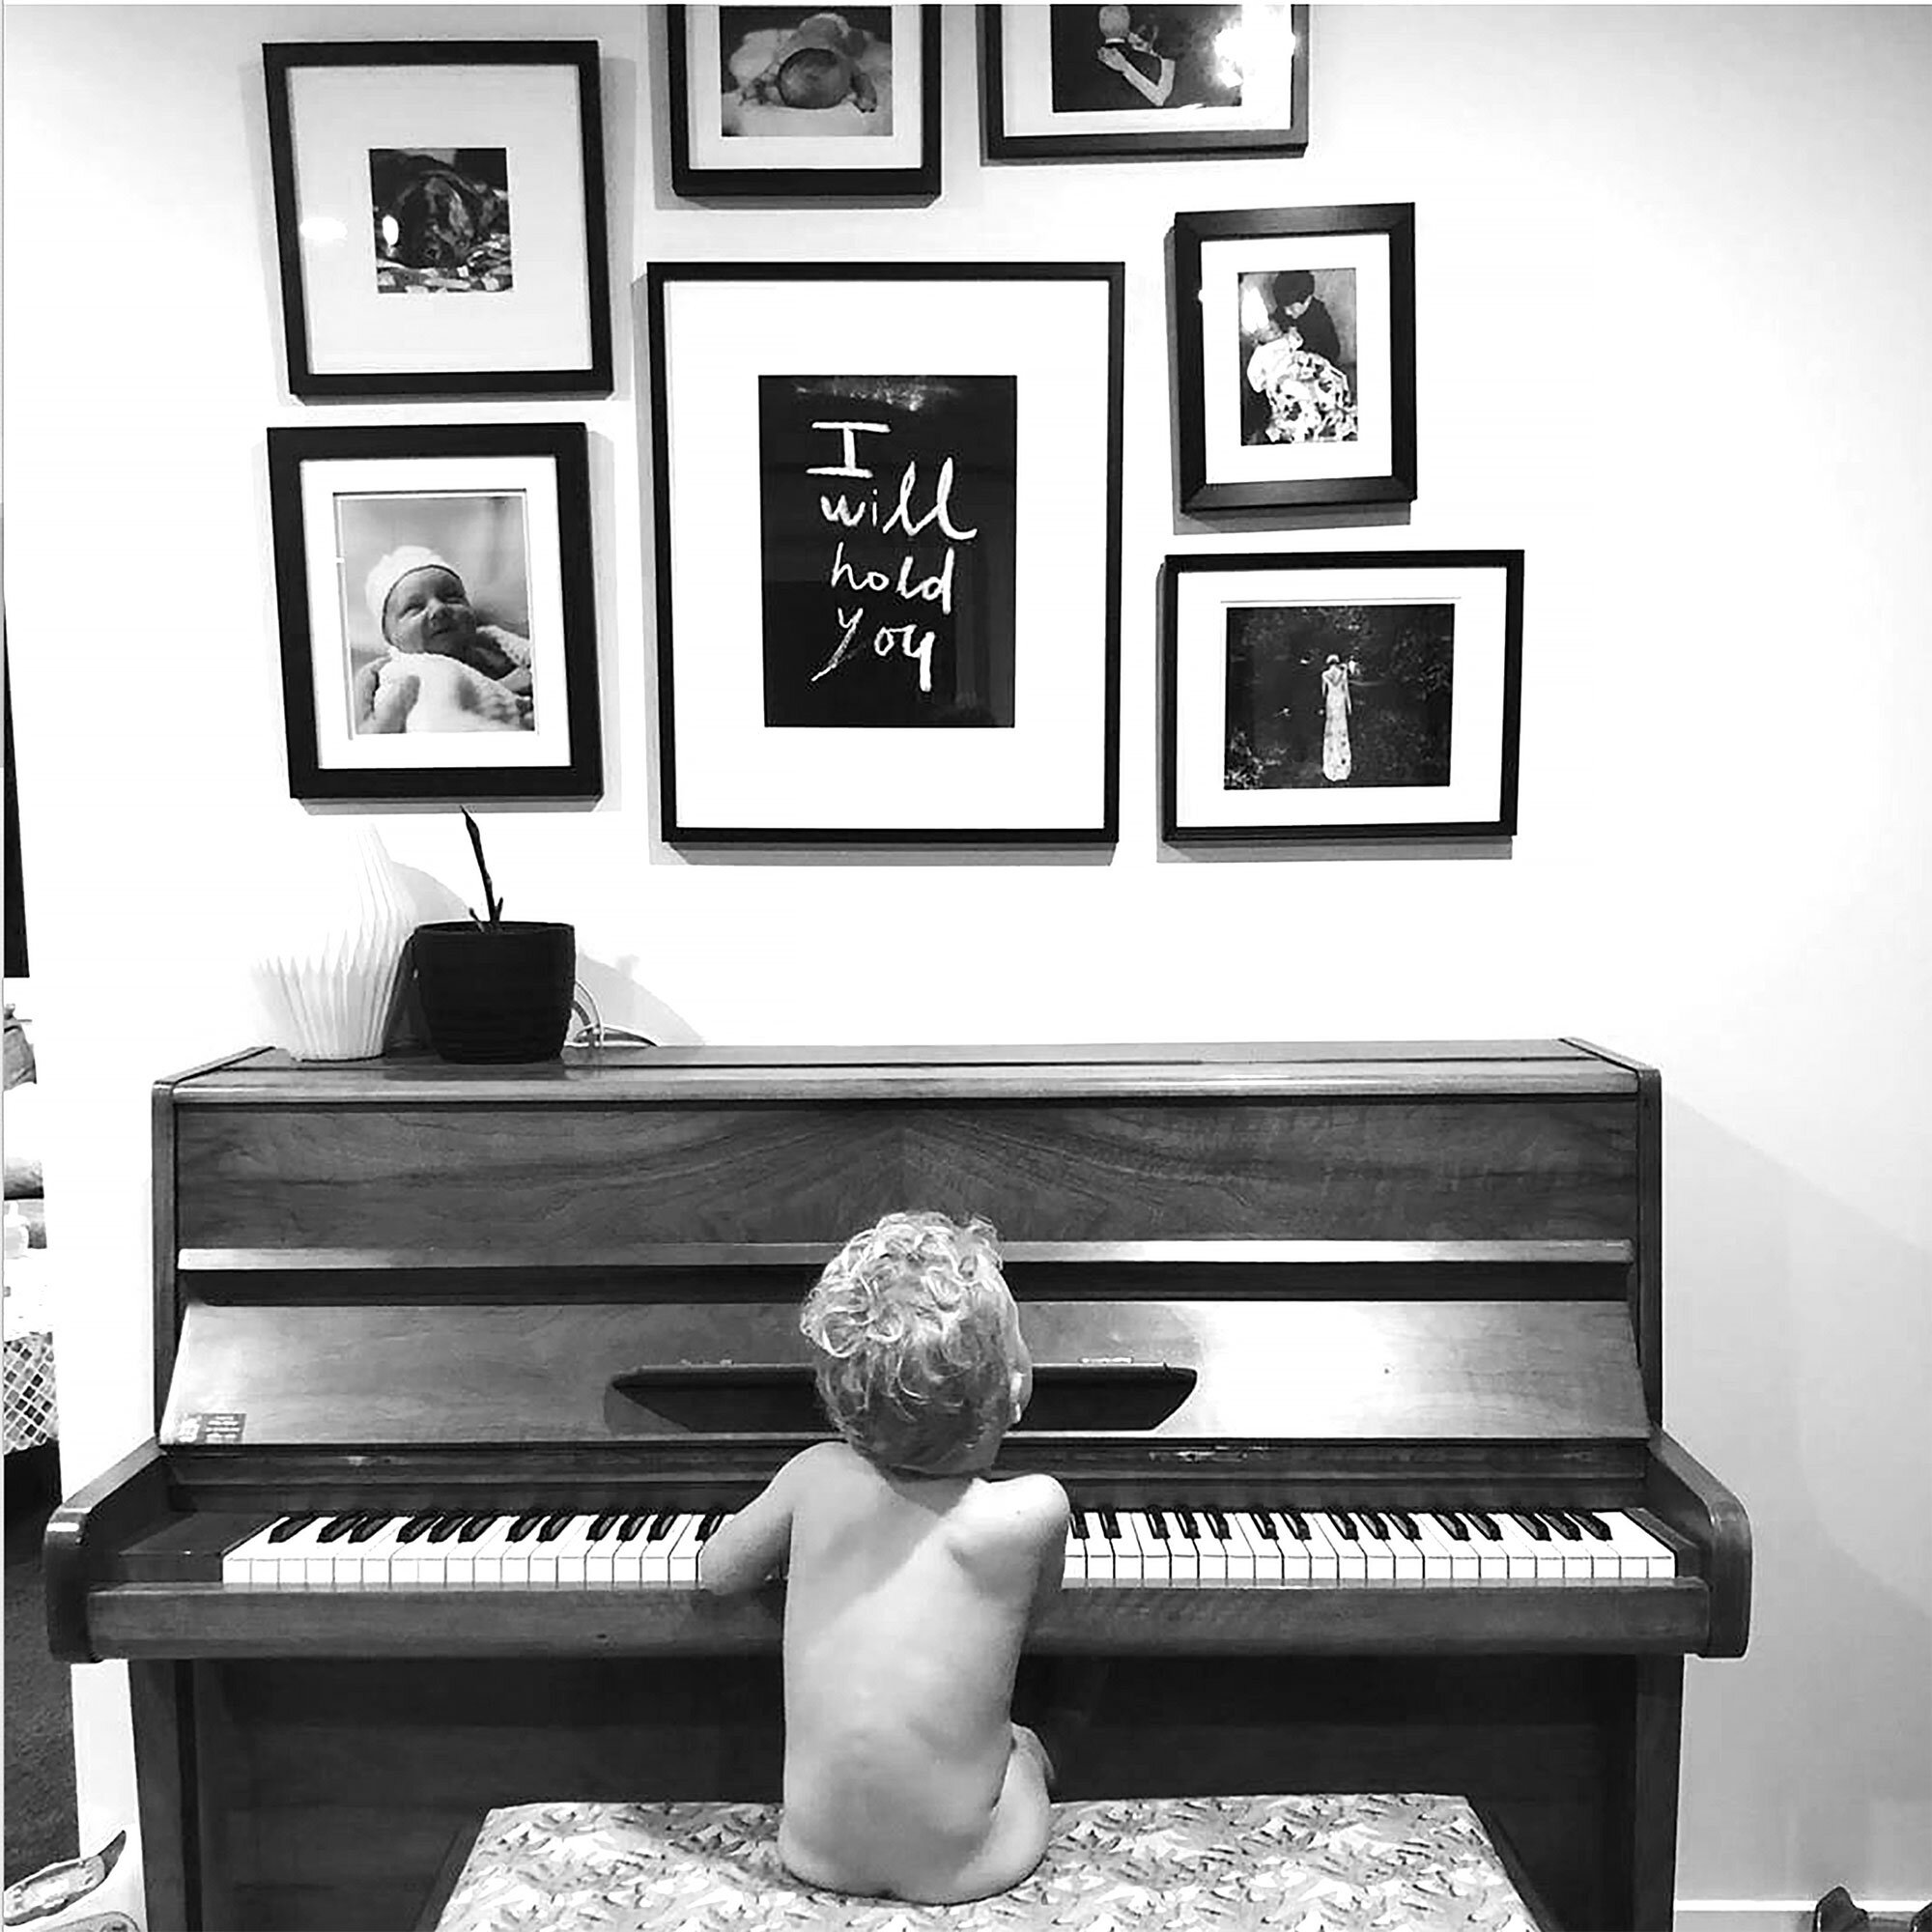  A small framed studioprint of     I will hold you, 2019   sits nestled within a salon hang of precious memories.  Photograph sent to me by the mum of the beautiful child sitting dreaming at the piano.  